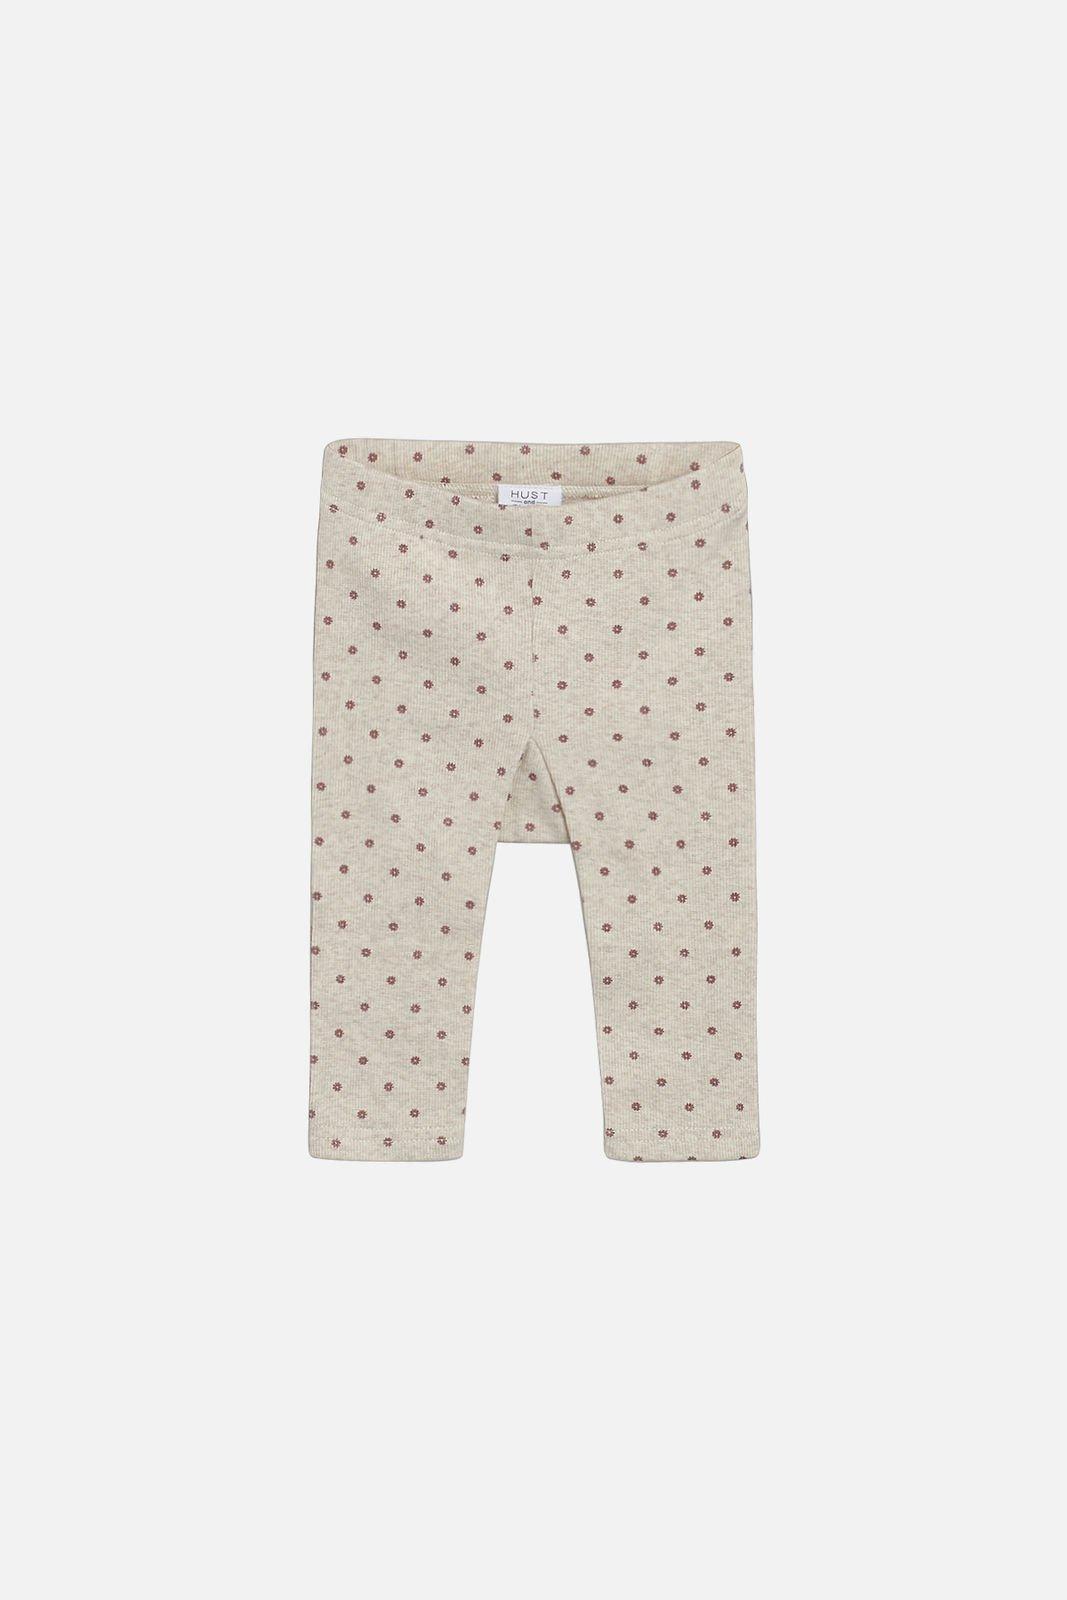 Image of Hust and Claire Baby Leggings Lara - 56